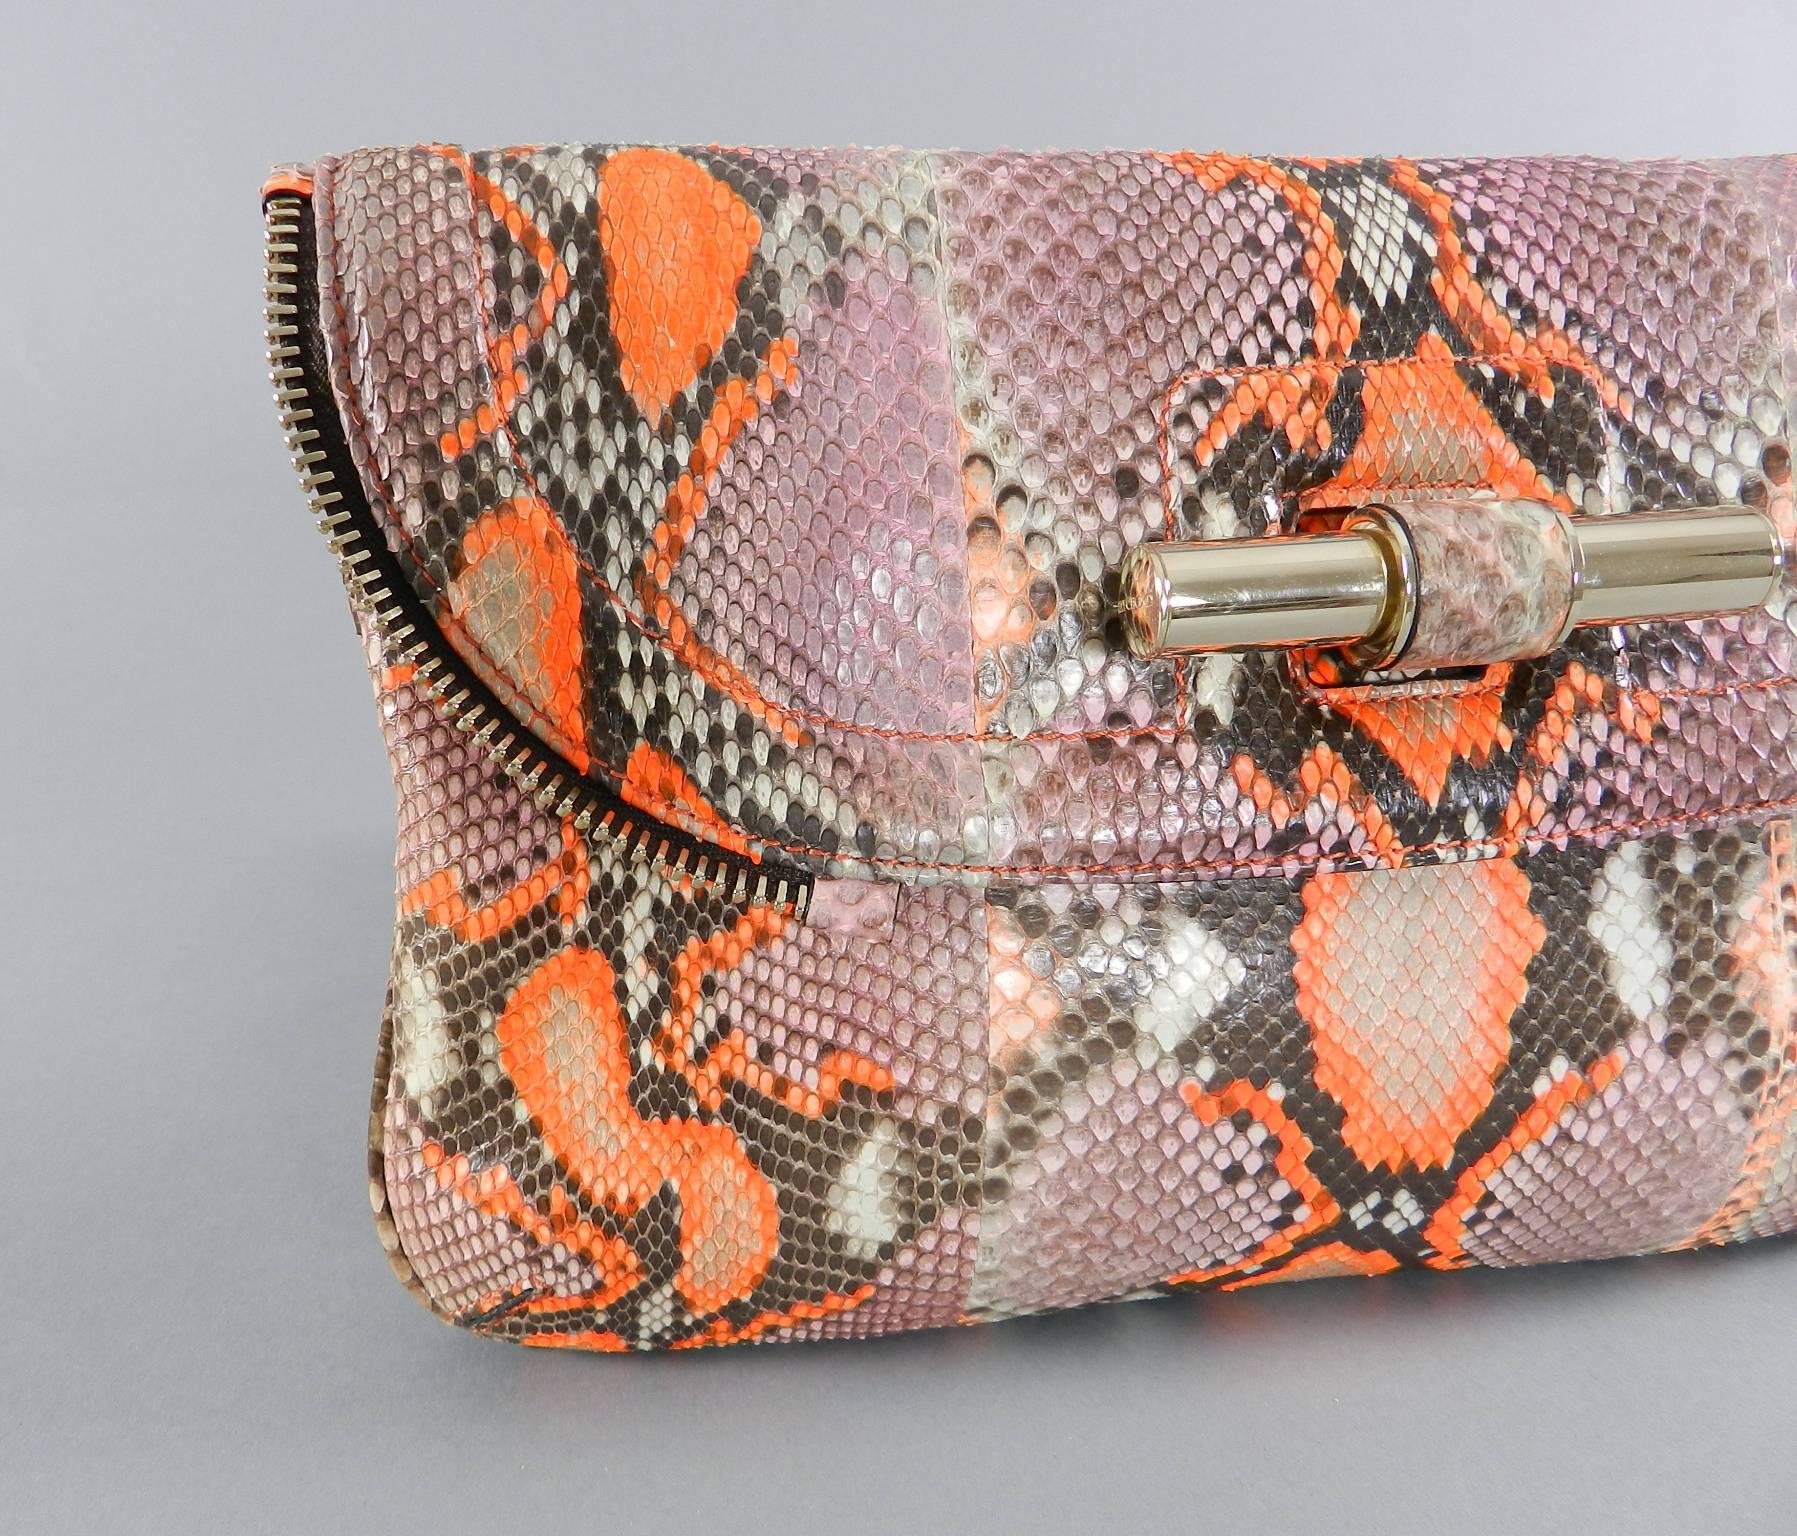 Jimmy Choo Pink and Neon Orange Python Jasmine Clutch bag.  Goldtone metal hardware. Excellent clean condition and appears to have not been used. Body of bag measures about 11.5 x 7 x 1.5".  

We ship worldwide.